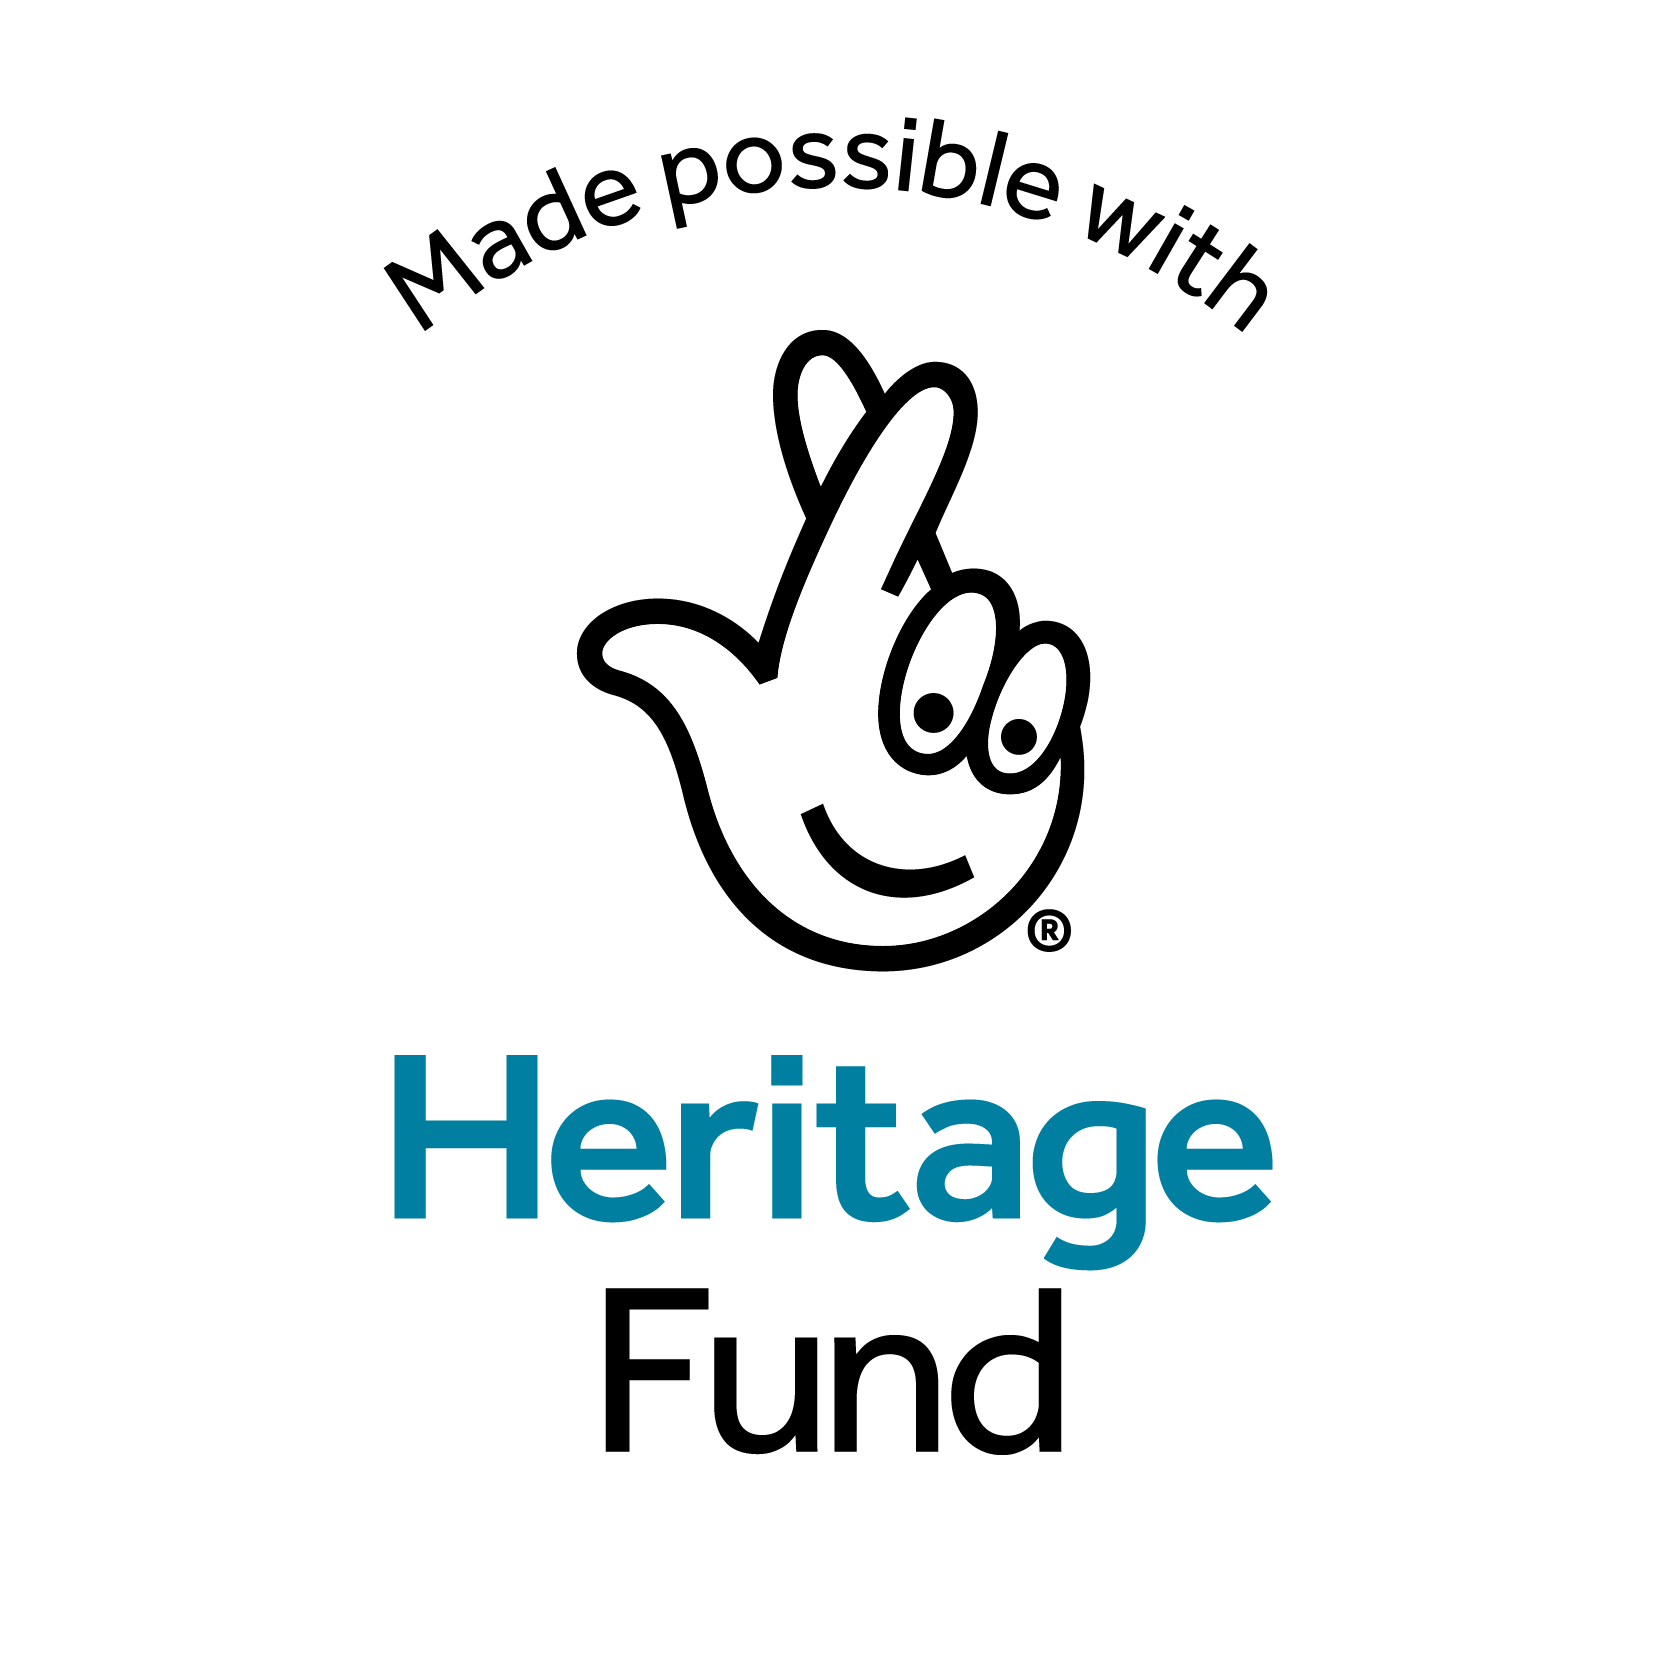 Made possible with the Heritage Fund